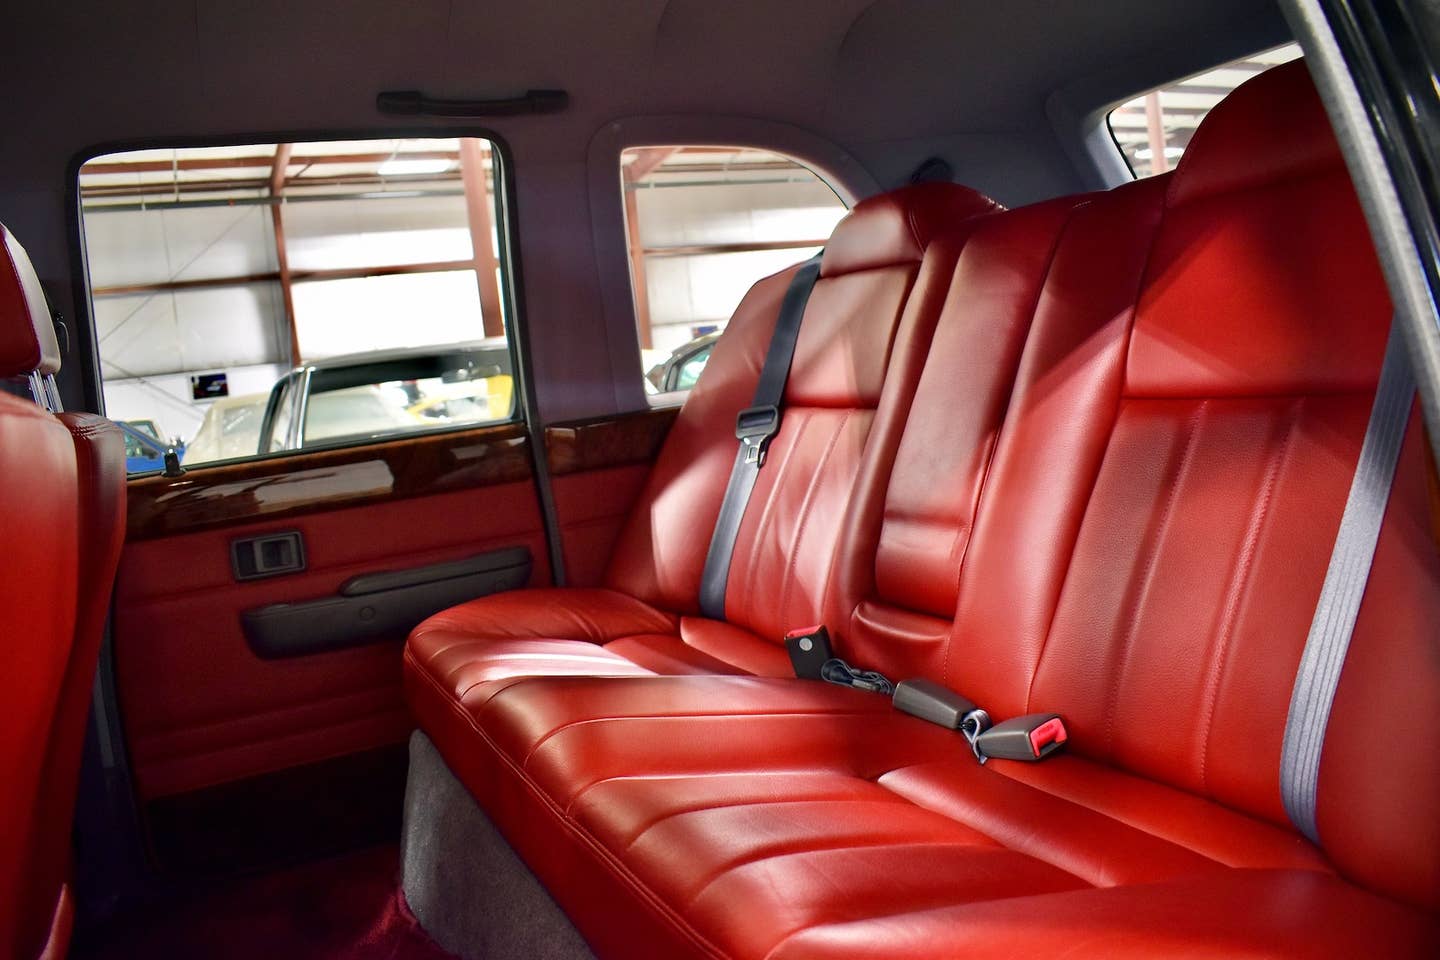 1996 Toyota Classic back seat with red leather